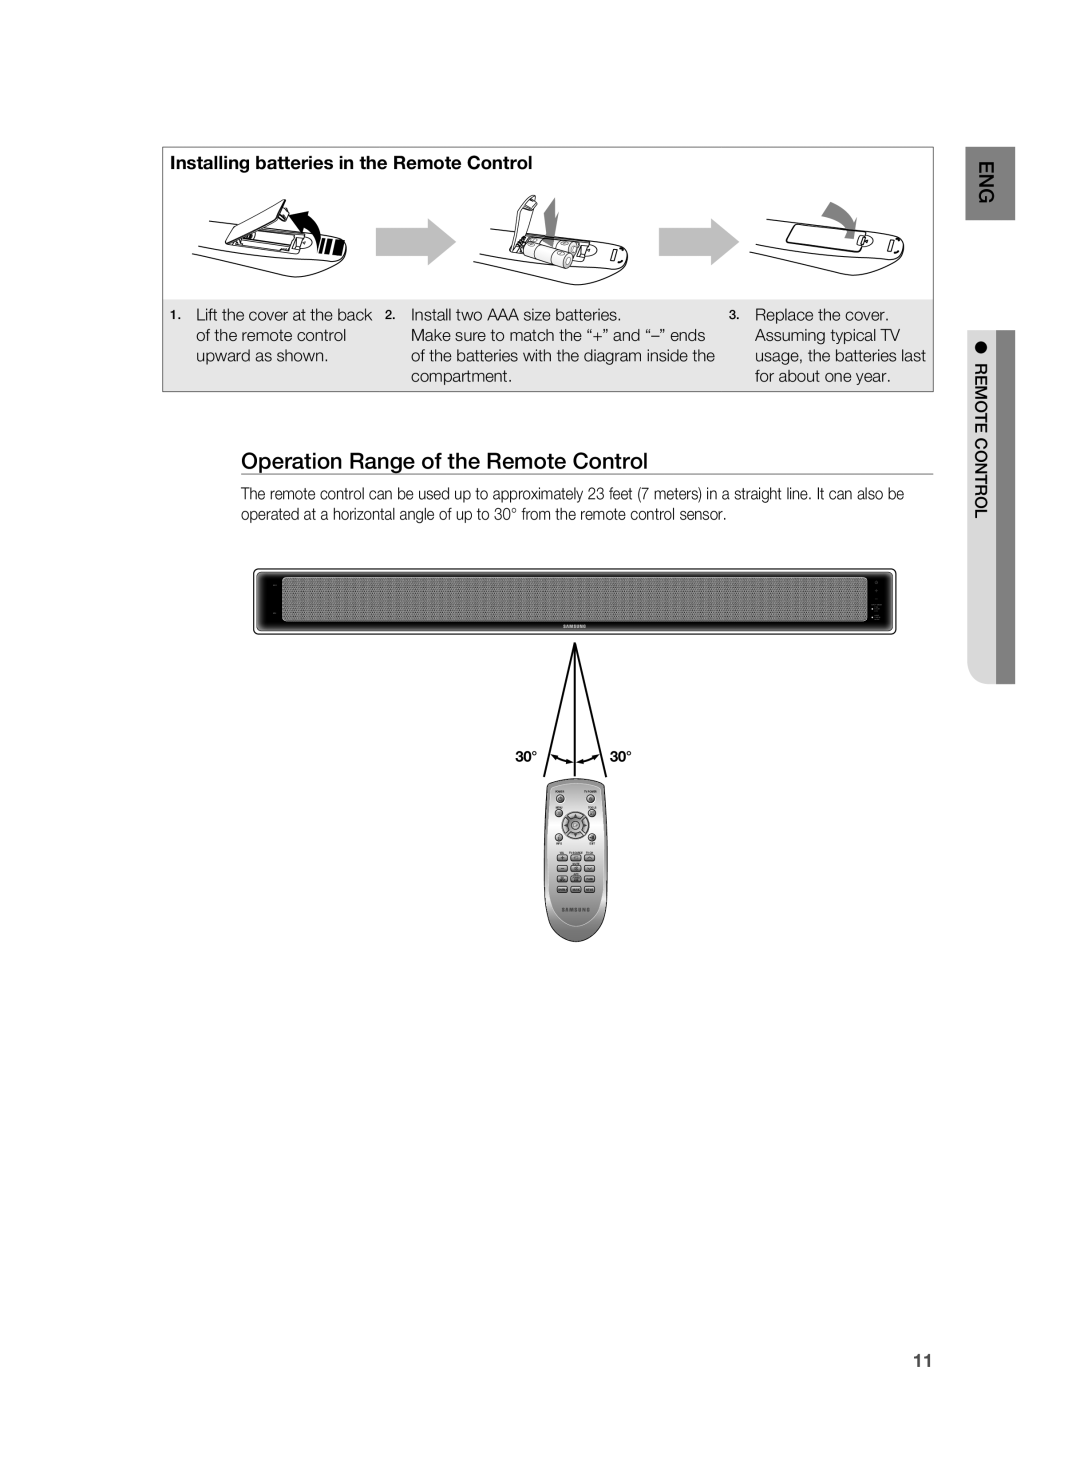 Samsung AH68-02184F user manual Operation Range of the Remote Control, Installing batteries in the Remote Control 